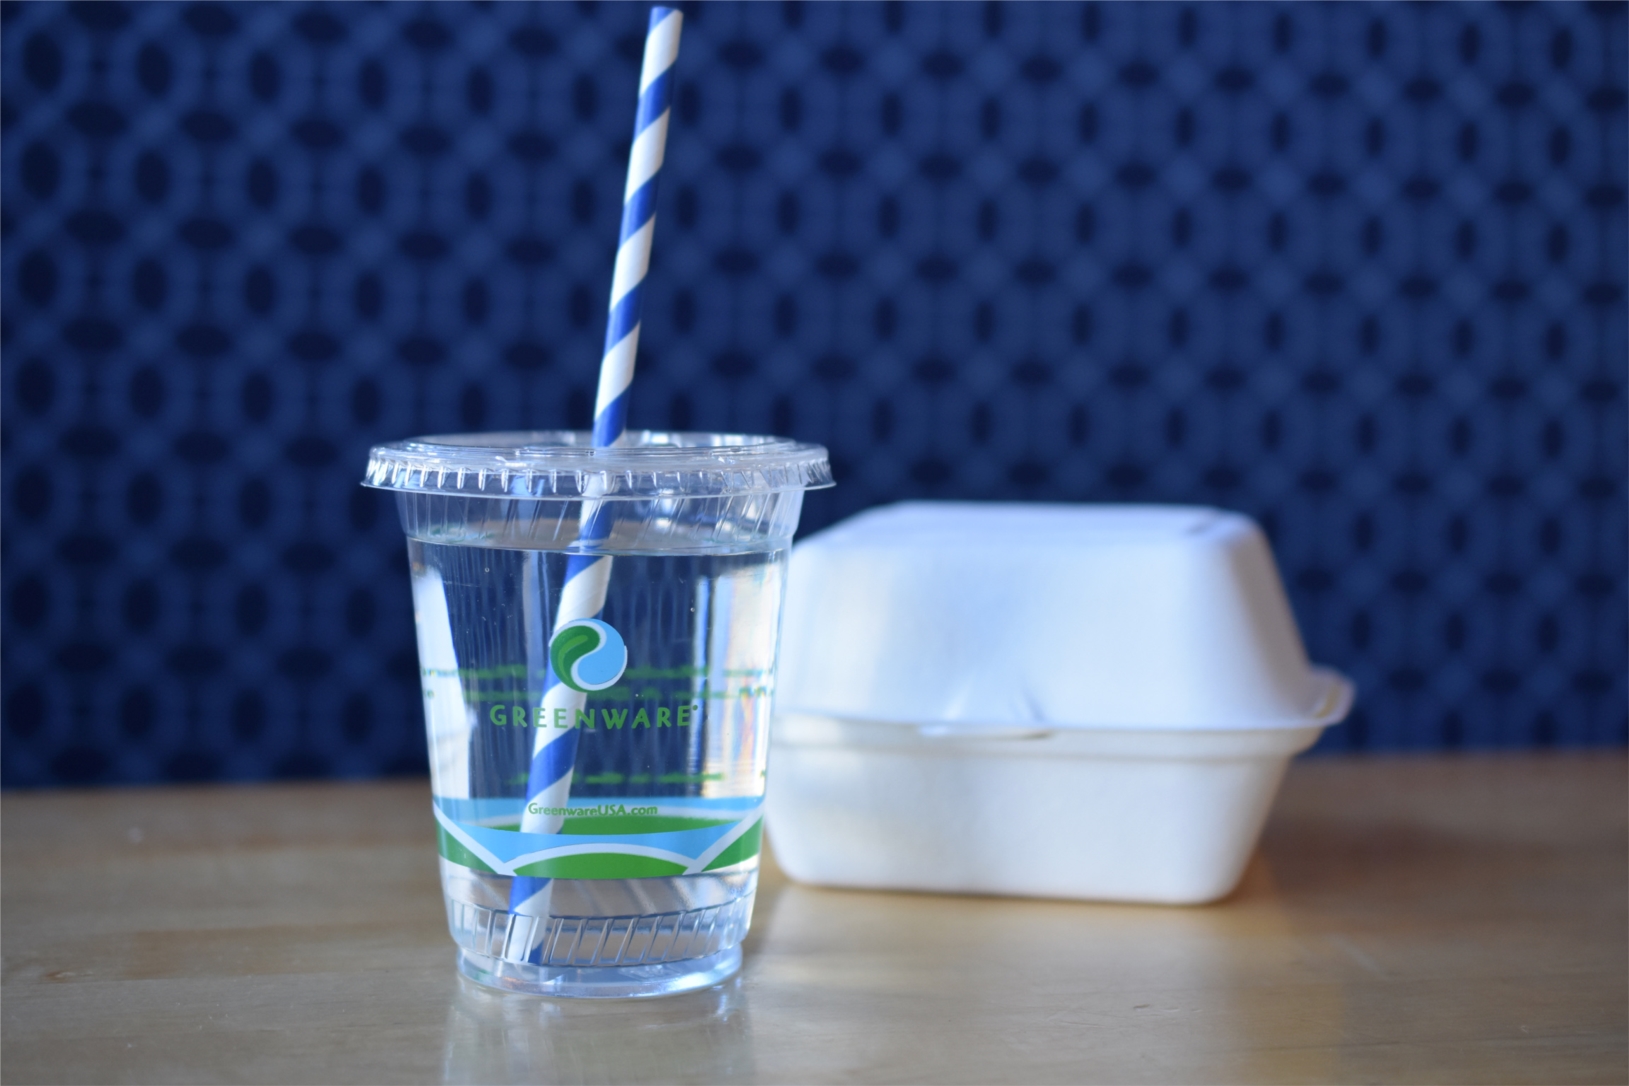 To help better our environment, our facilities have stopped offering plastic straws and only offer paper straws upon request. All to-go containers are also made from biodegradable materials. We encourage everyone to #skipthestraw.